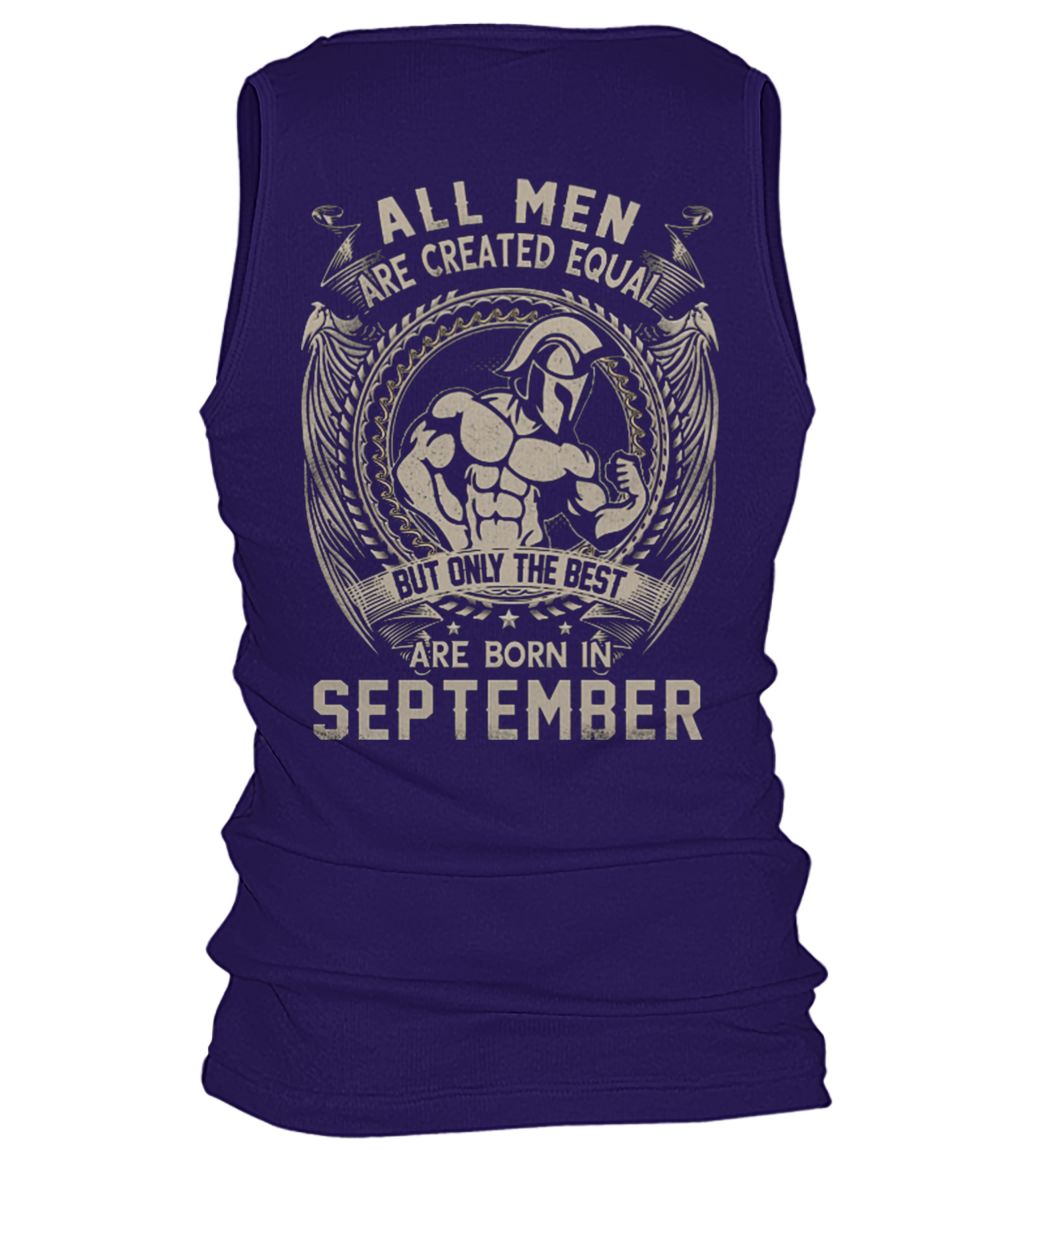 All men created equal but the best are born in september men's tank top